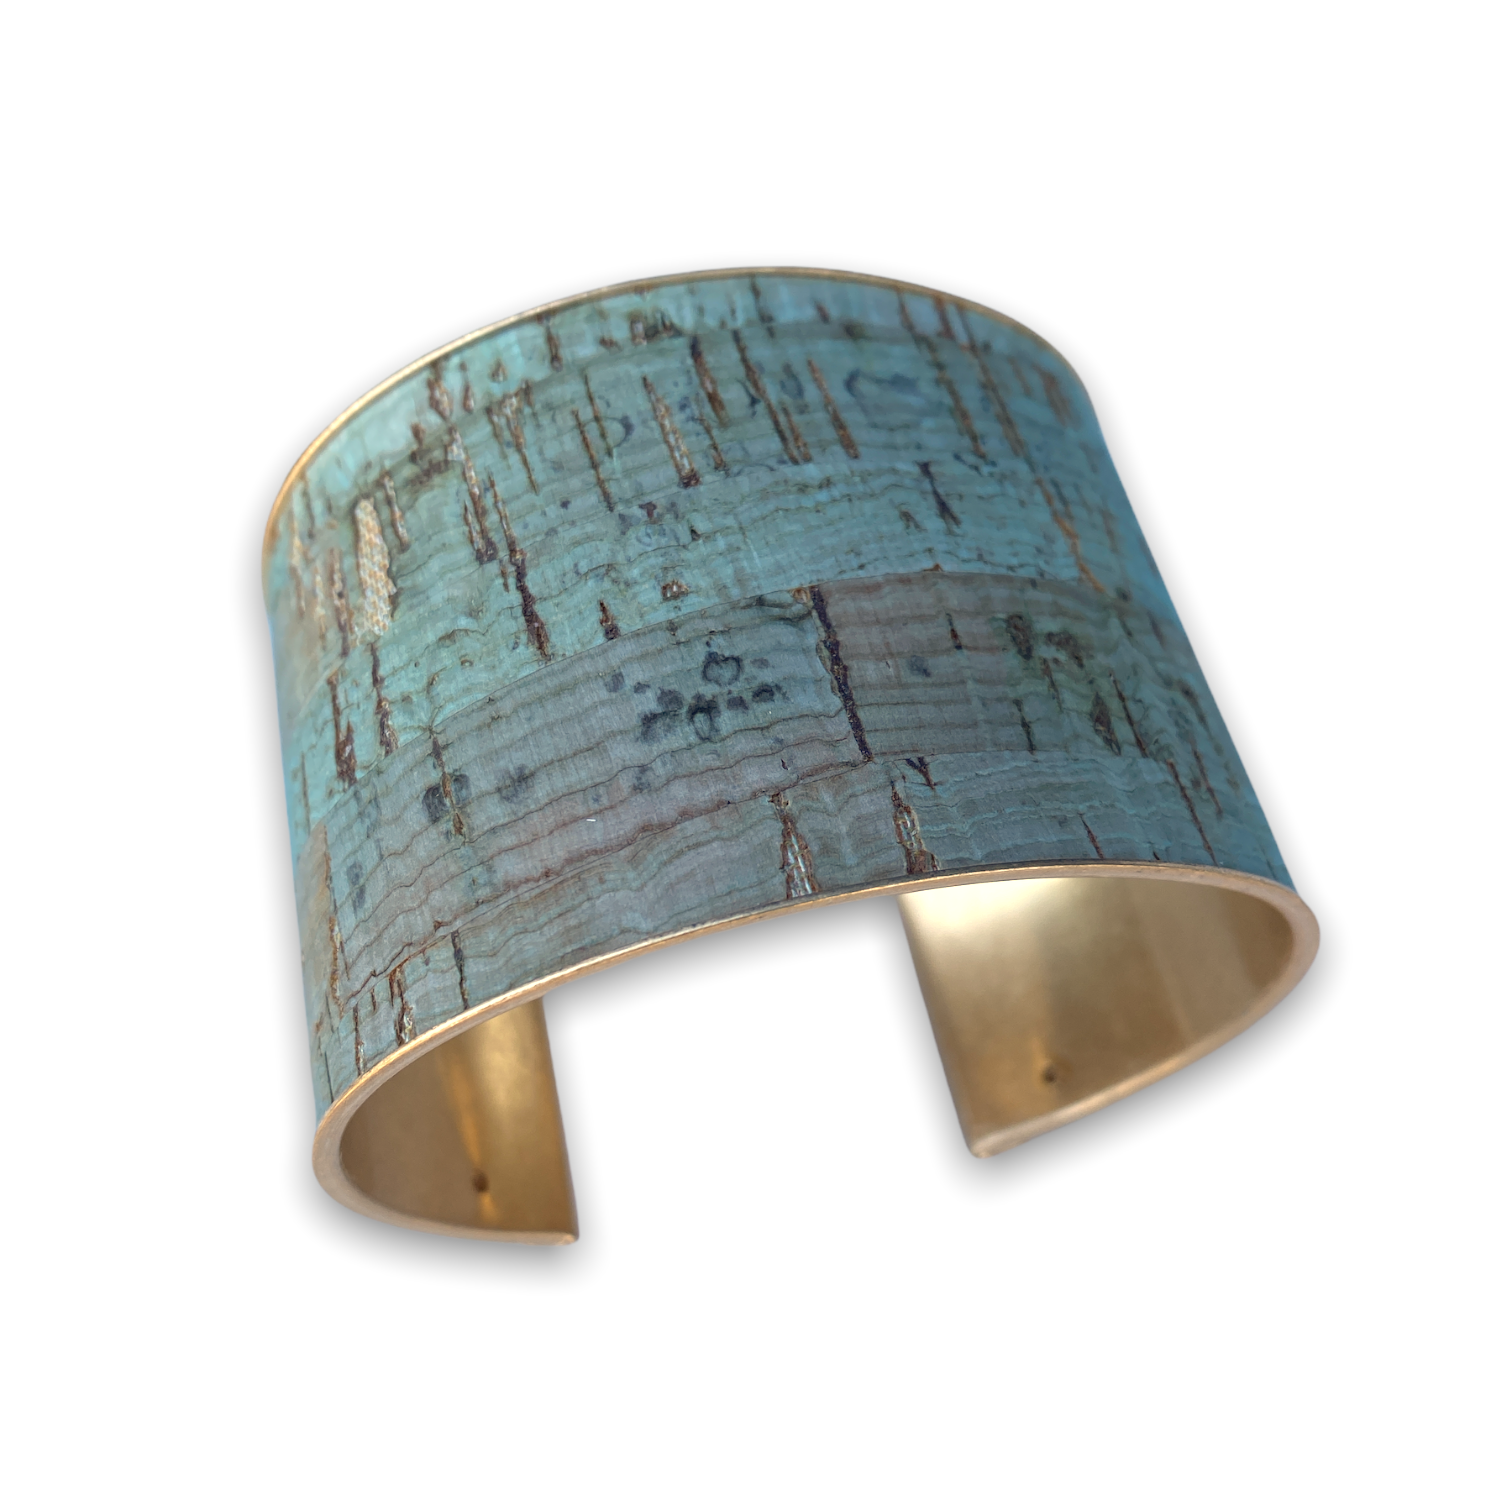 Brass Metal and Mint Cork Inlay Cuff Bracelet with Gold Accents - 1-3/4-in - Mellow Monkey